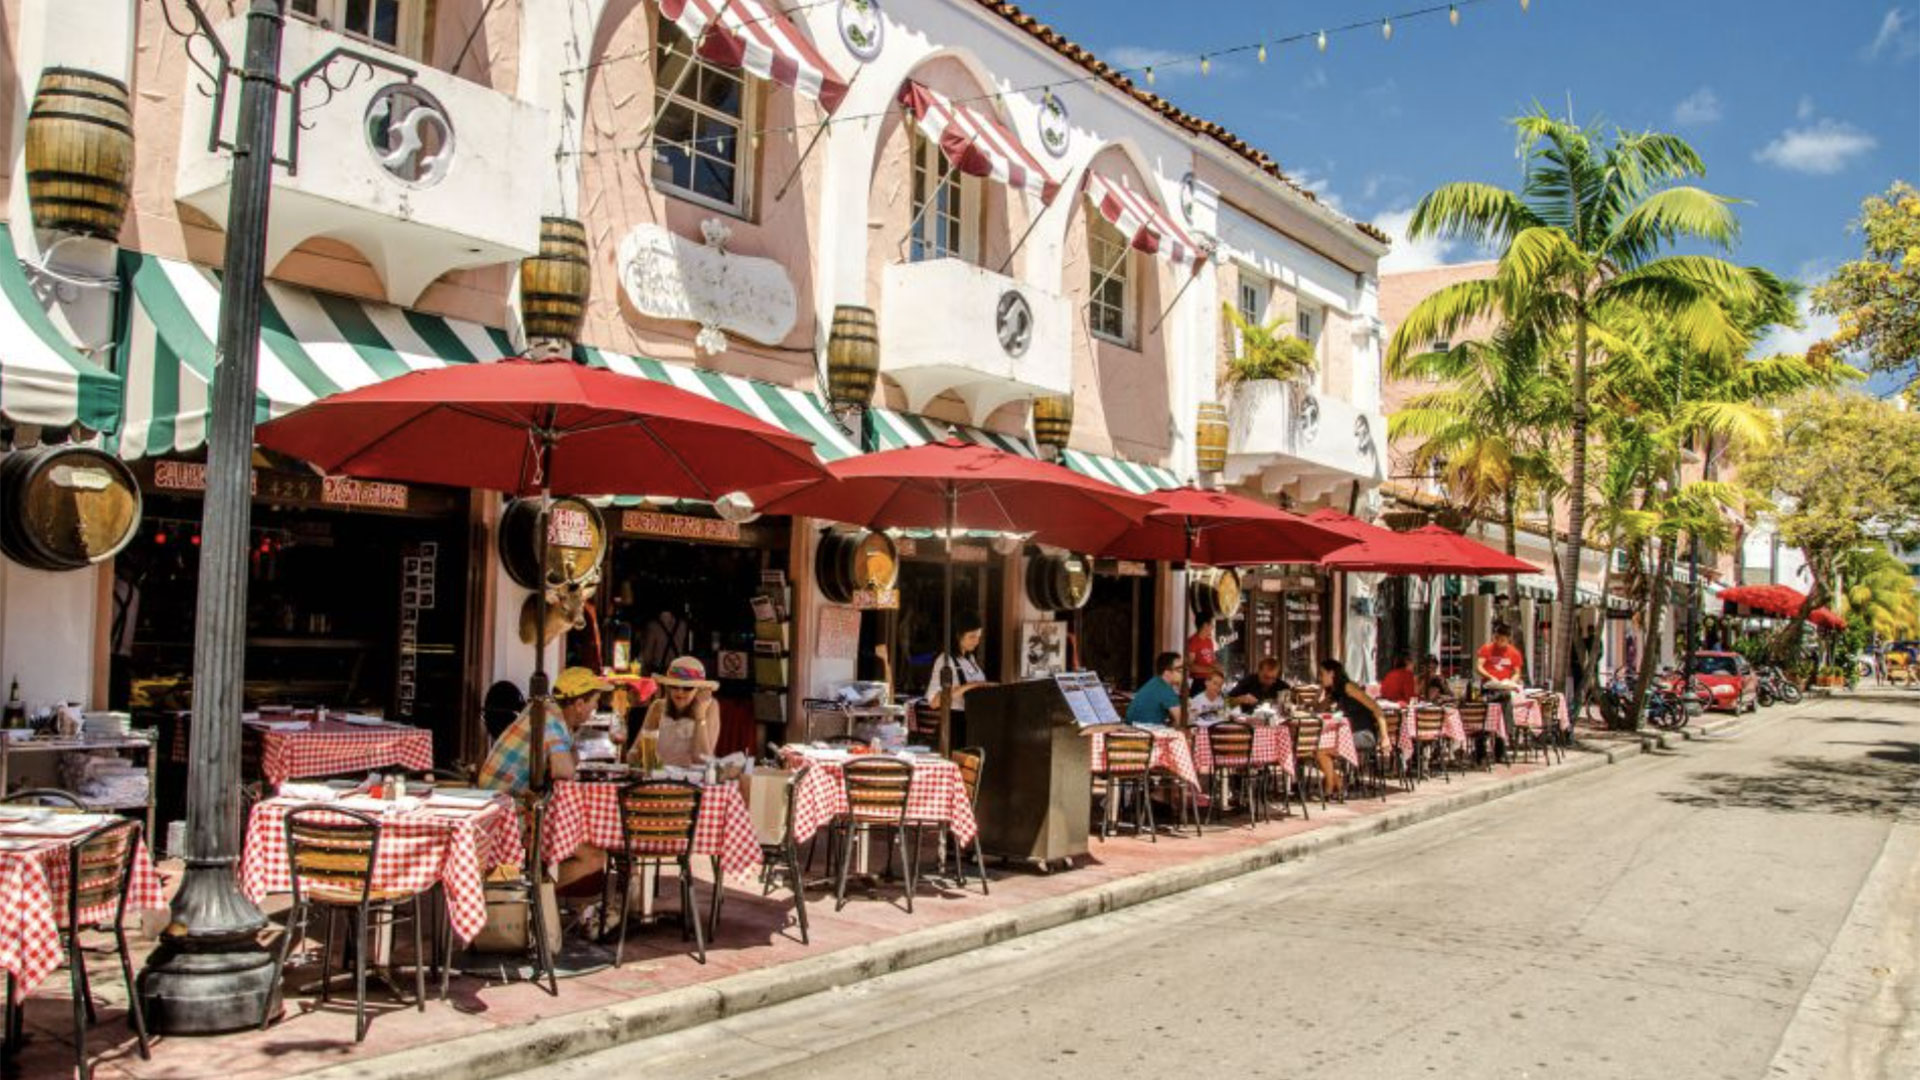 South Beach Food Tours Take A New Culinary Tour In And Around South Beach 